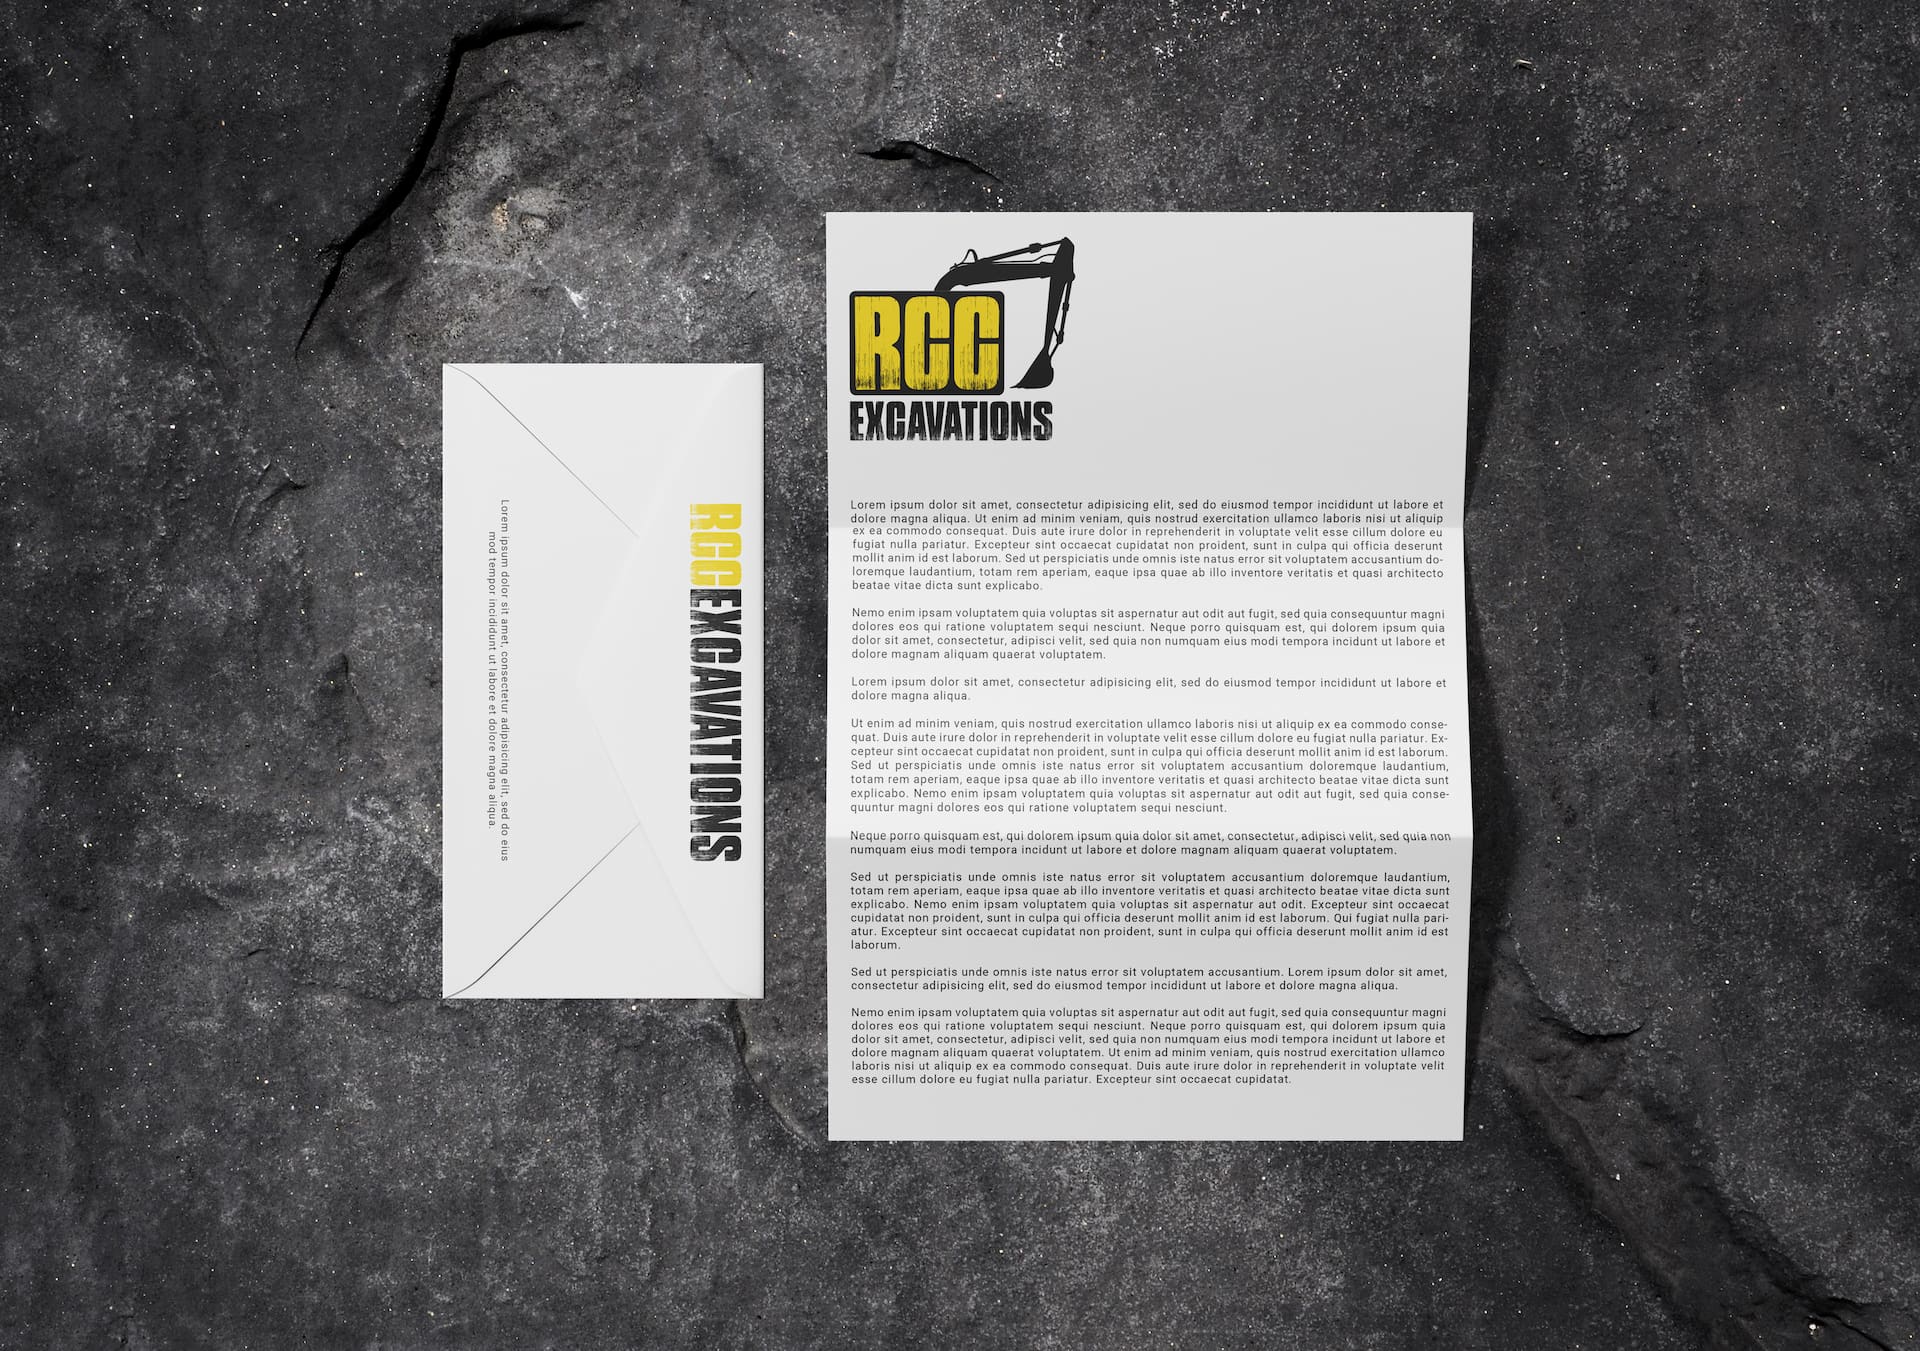 Logo Design for RCC Excavations, Designed by Spacey Studios